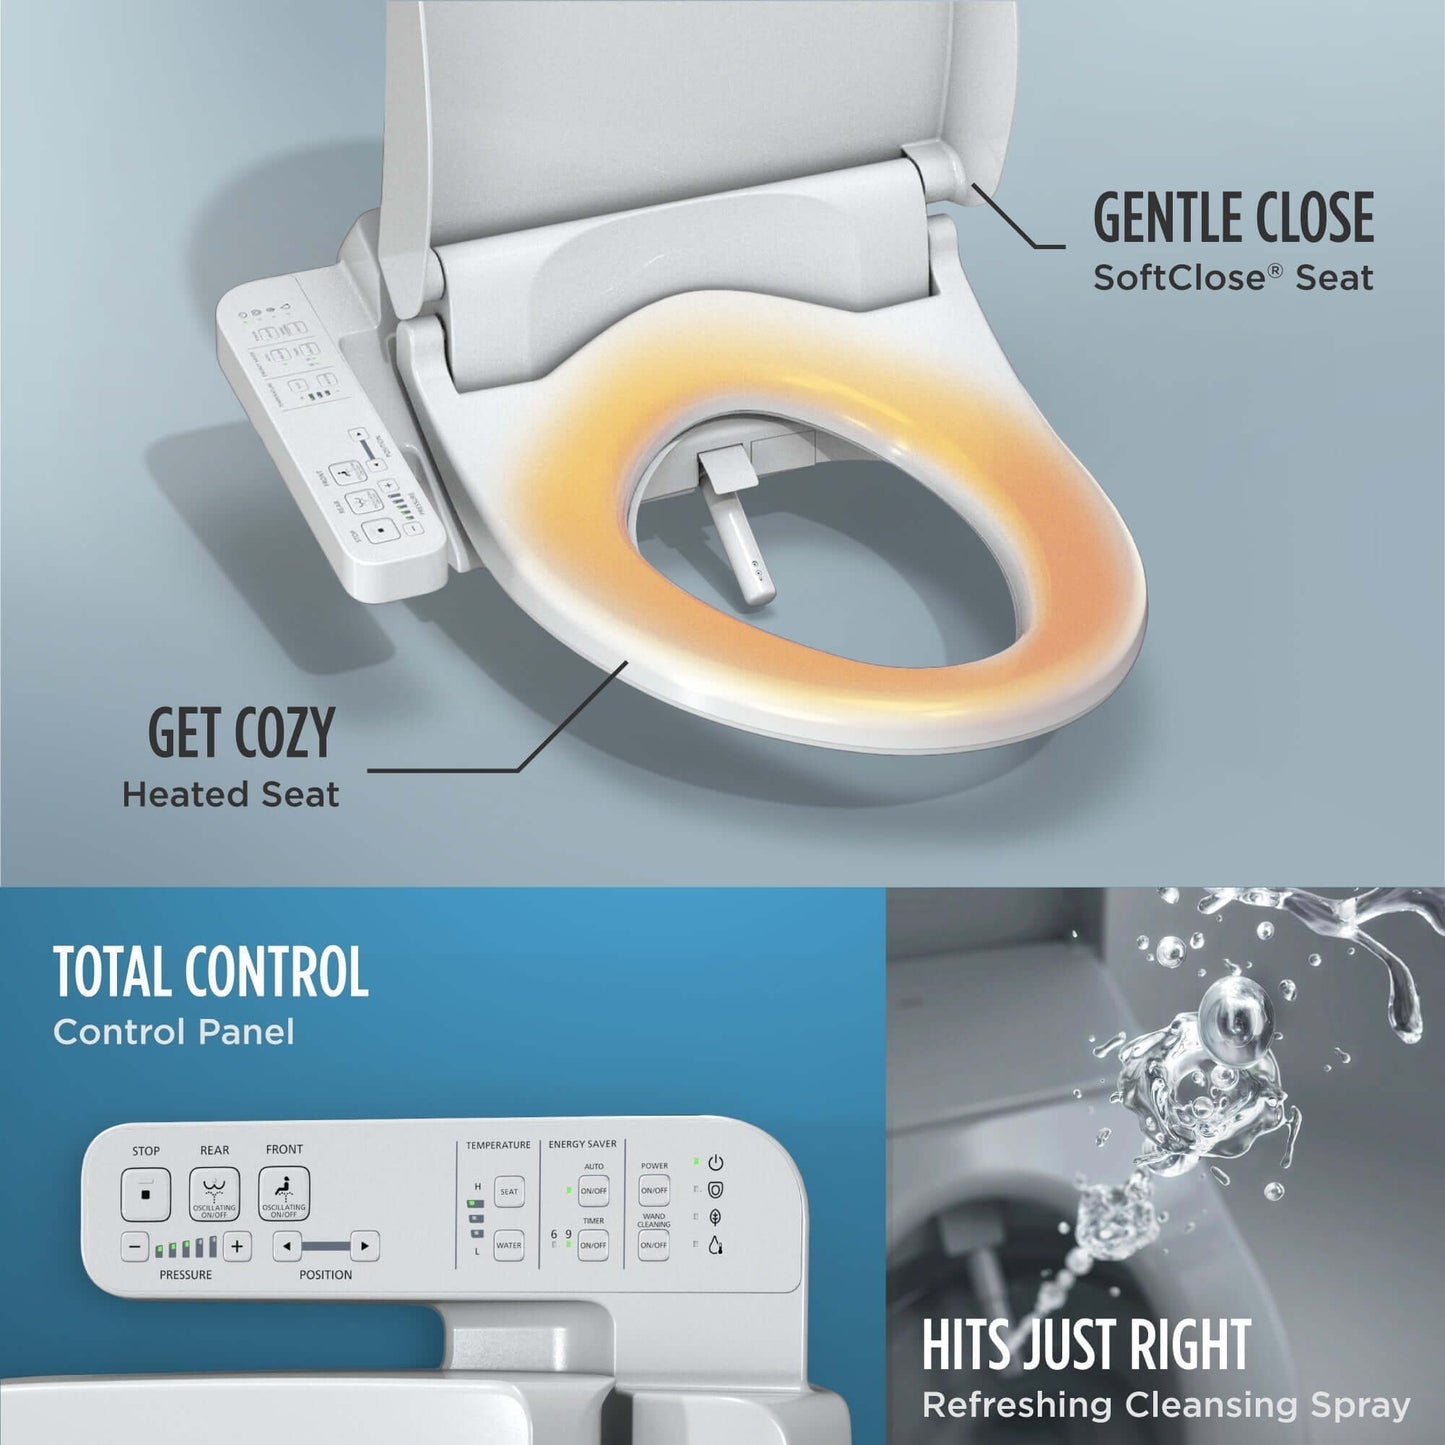 TOTO WASHLET A2 Electronic Bidet Toilet Seat with Heated Seat and SoftClose Lid, Elongated - SW3004#01